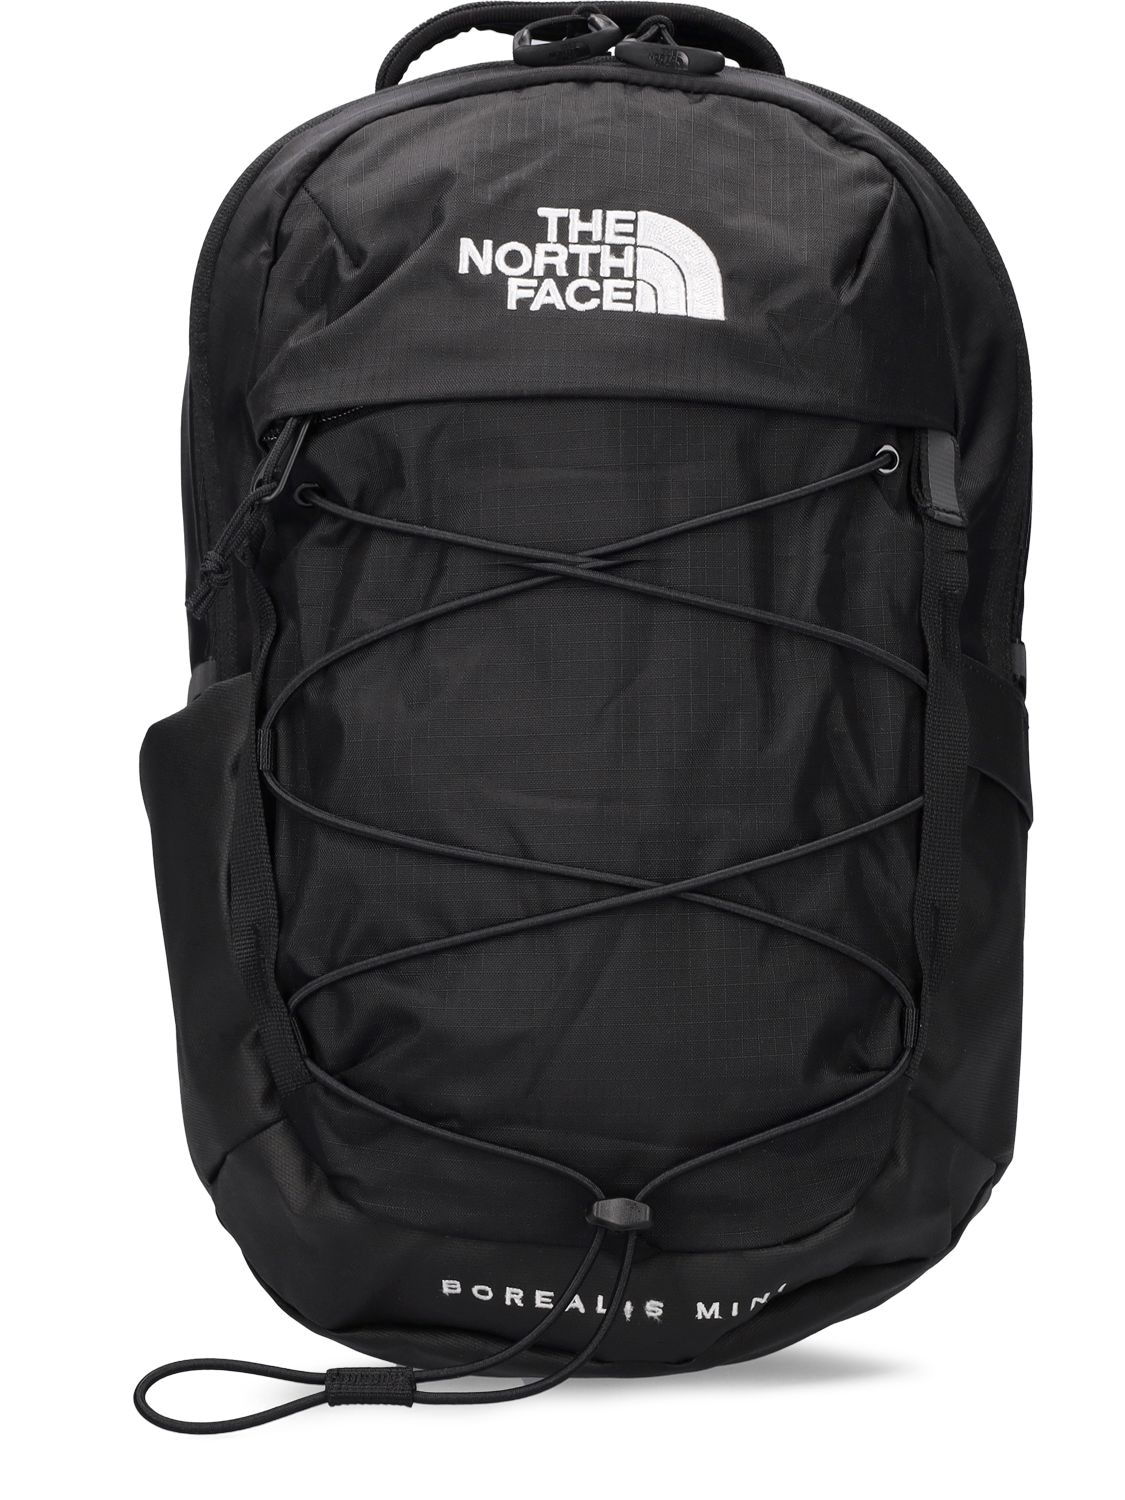 The North Face Borealis Mini Backpack In Black